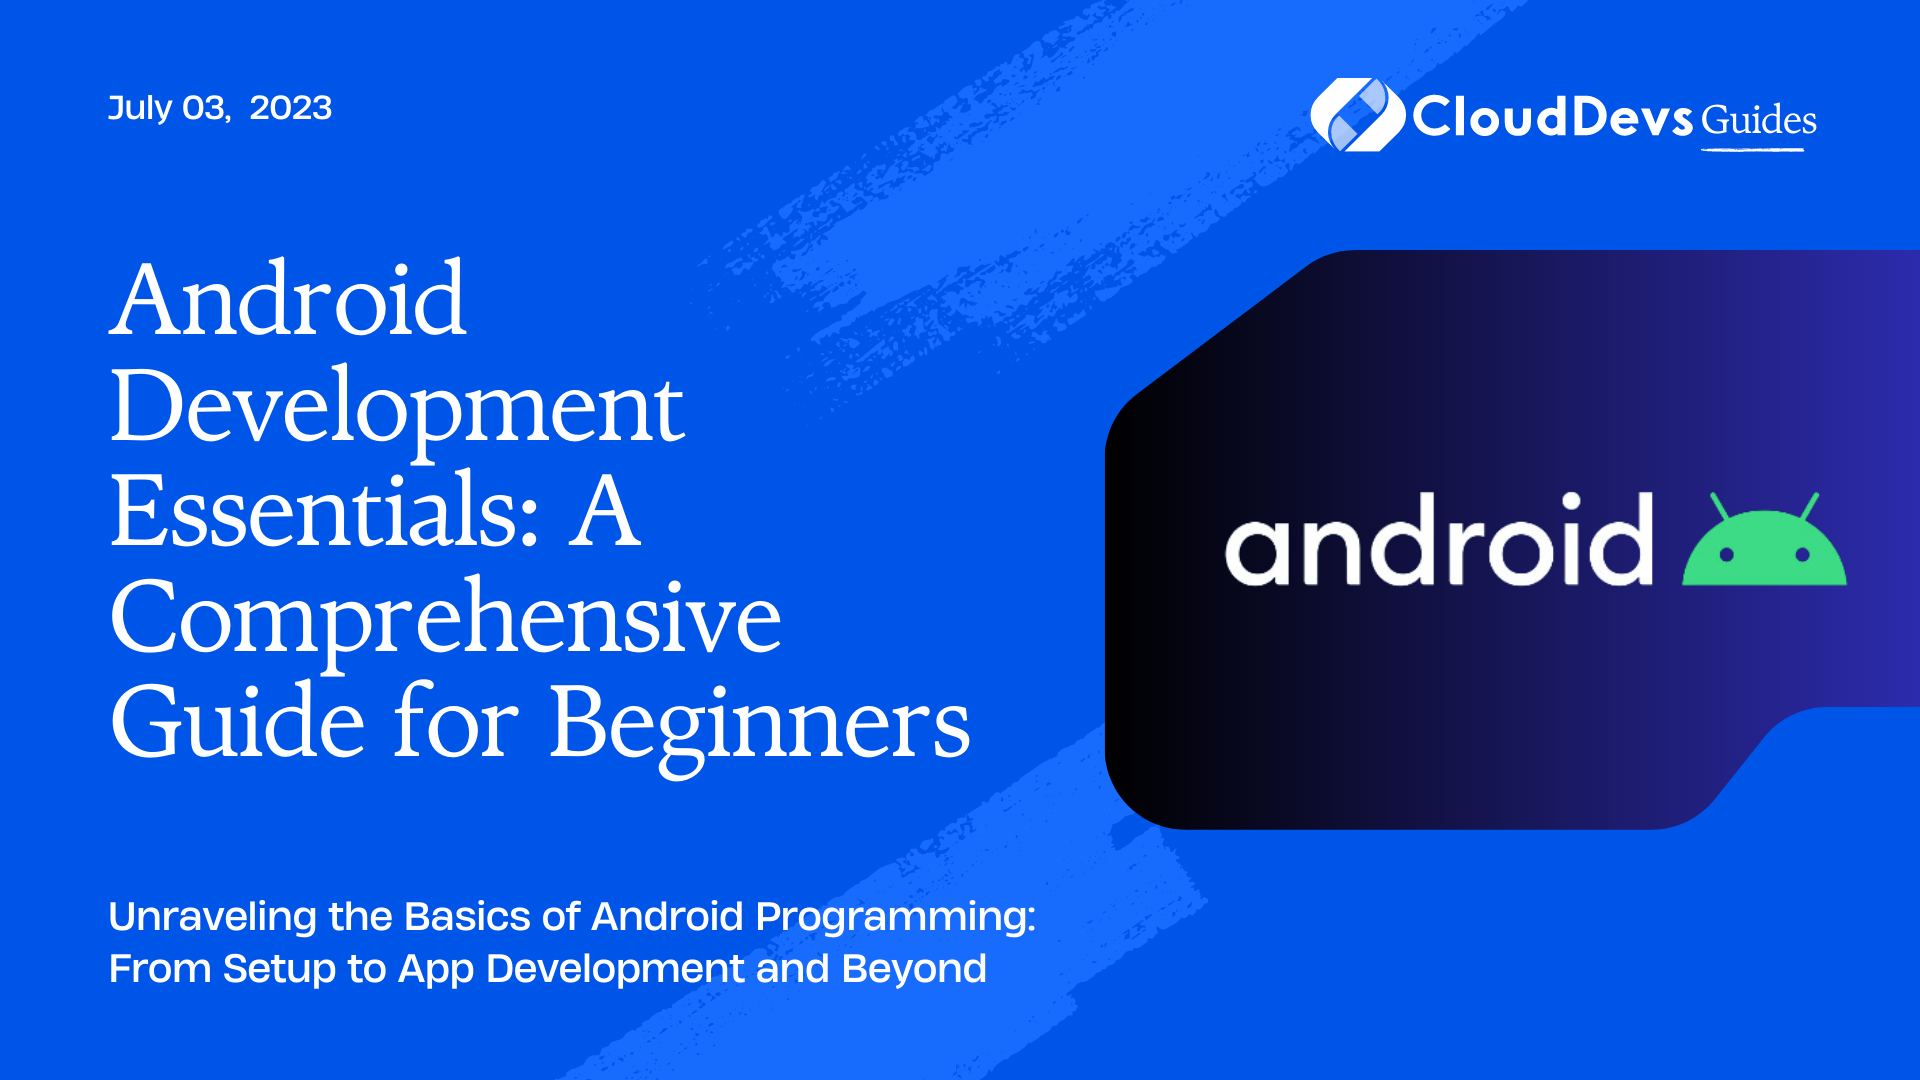 Android Development Essentials: A Comprehensive Guide for Beginners